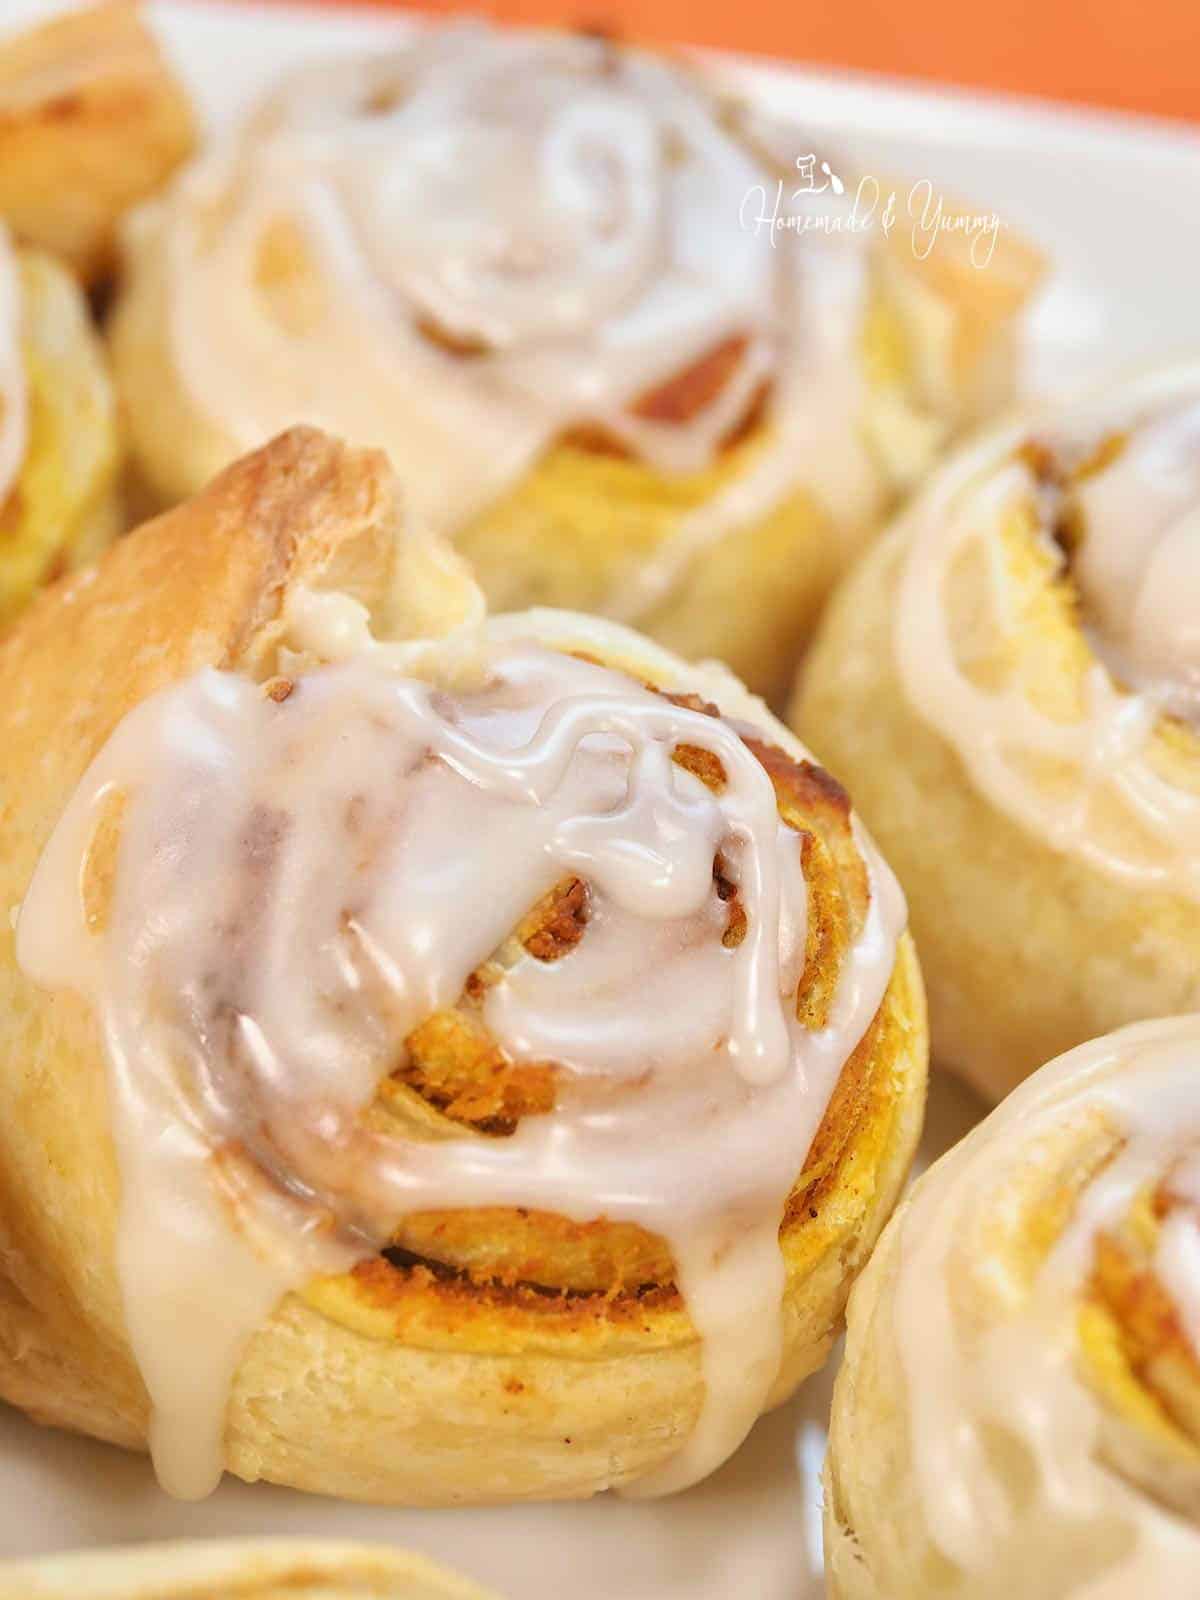 A cinnamon roll made with pumpkin and glazed with maple icing.